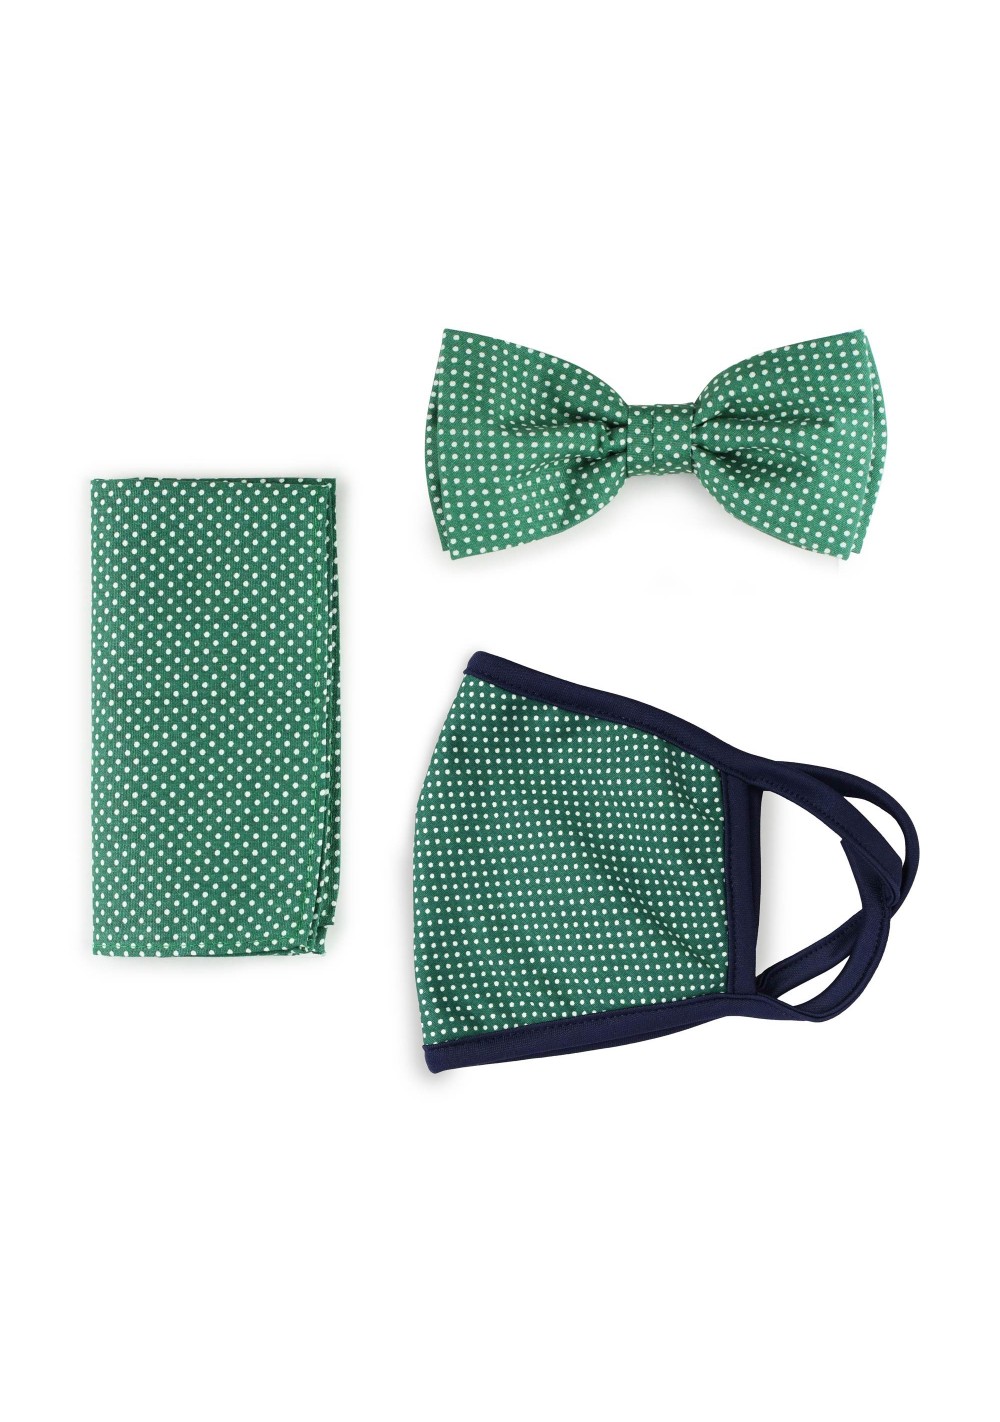 Mask and Bow Tie Set with Micro Dots in Kelly Green